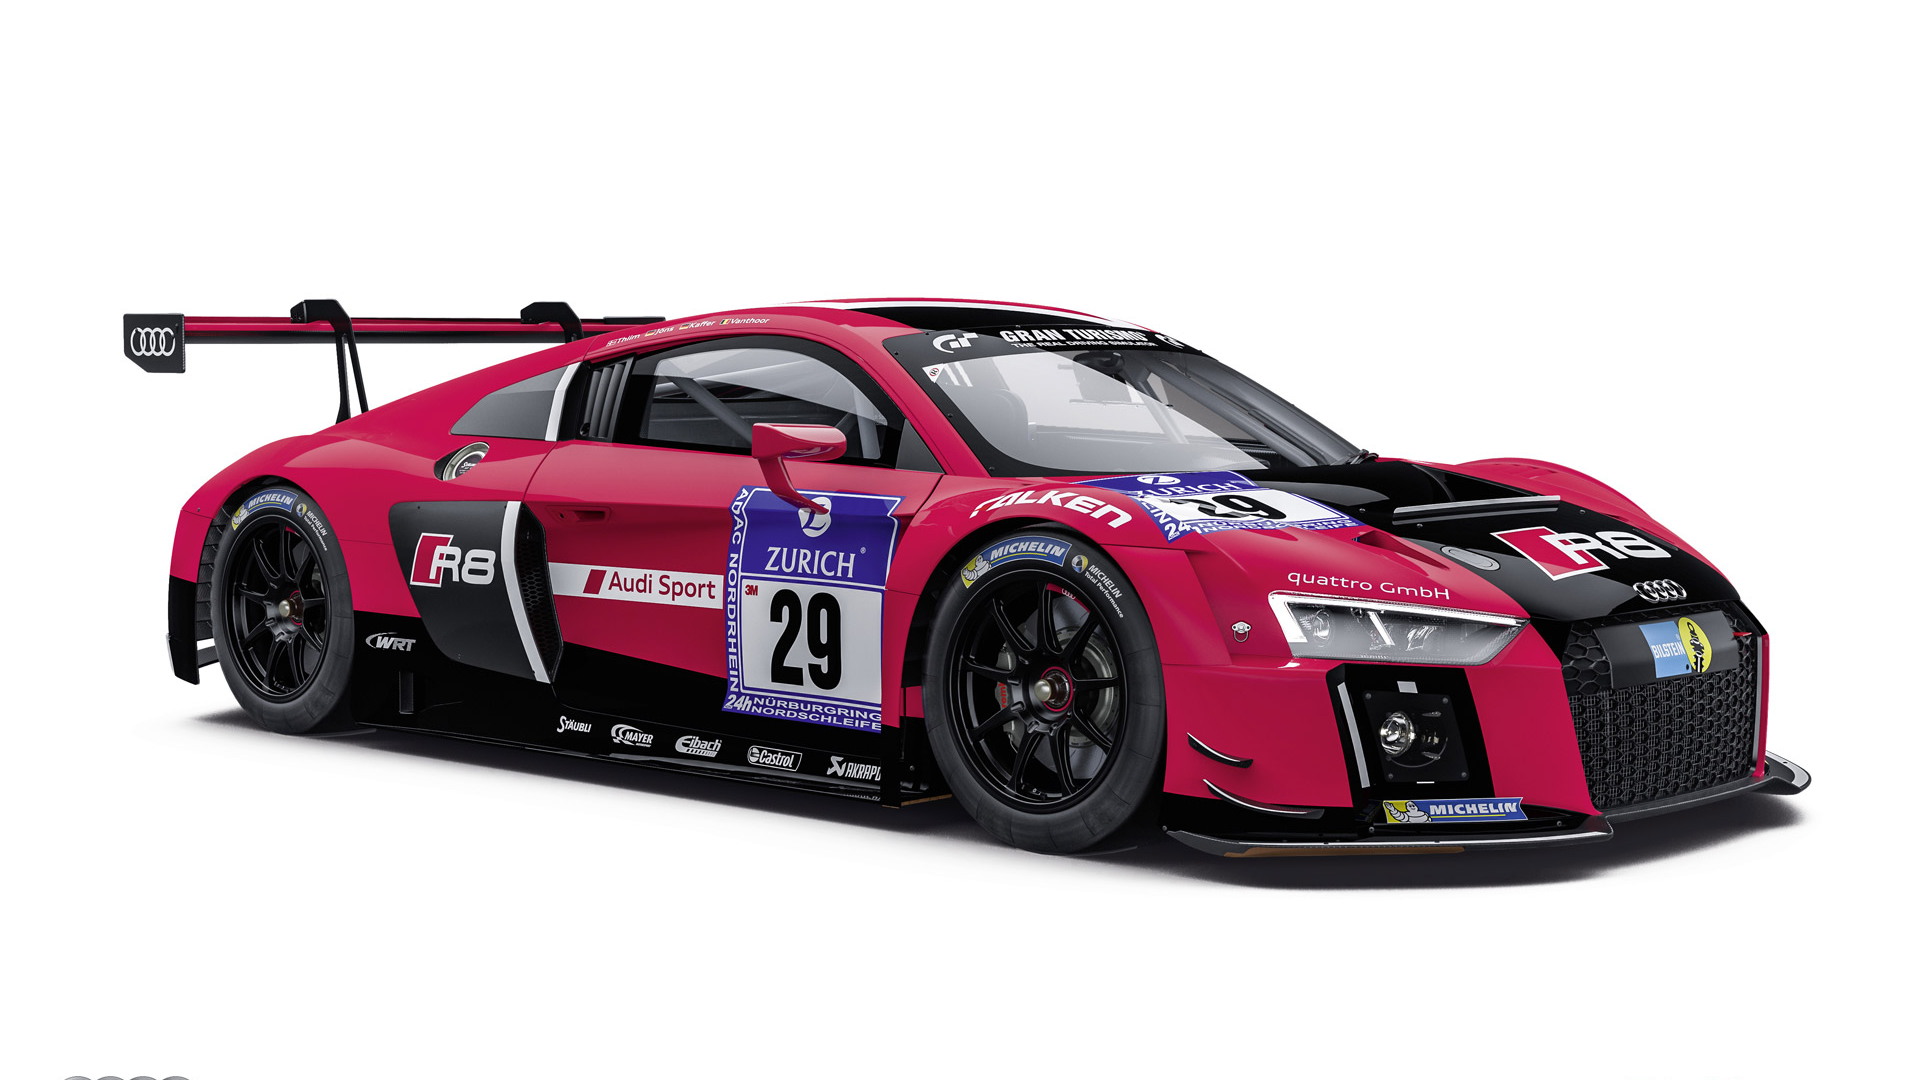 Speed And Style: The 2015 Audi R8 LMS